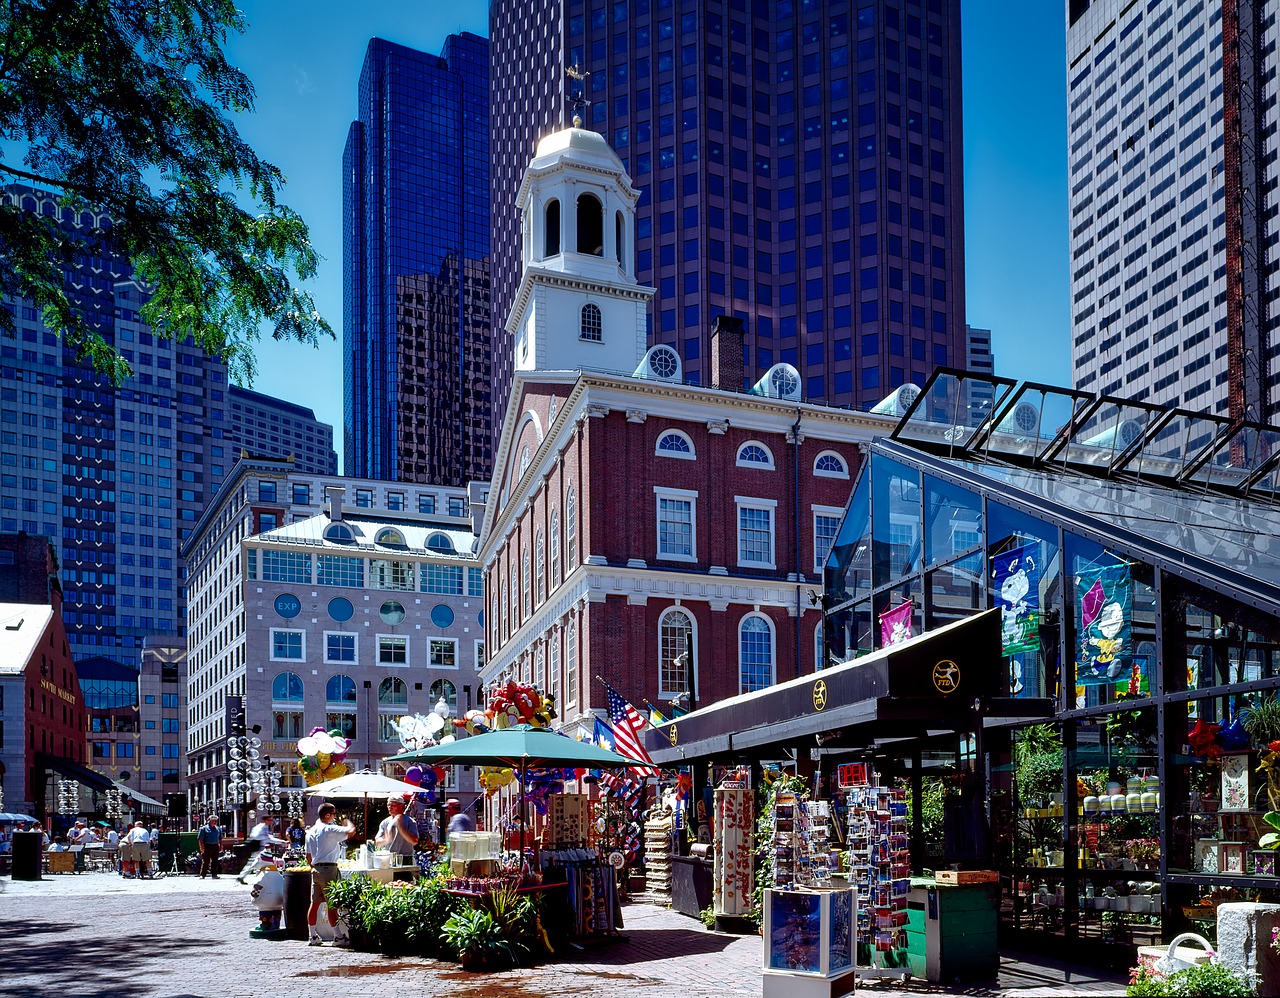 Pub Club Heading to WGBH and Faneuil Hall for Final 2016 Events